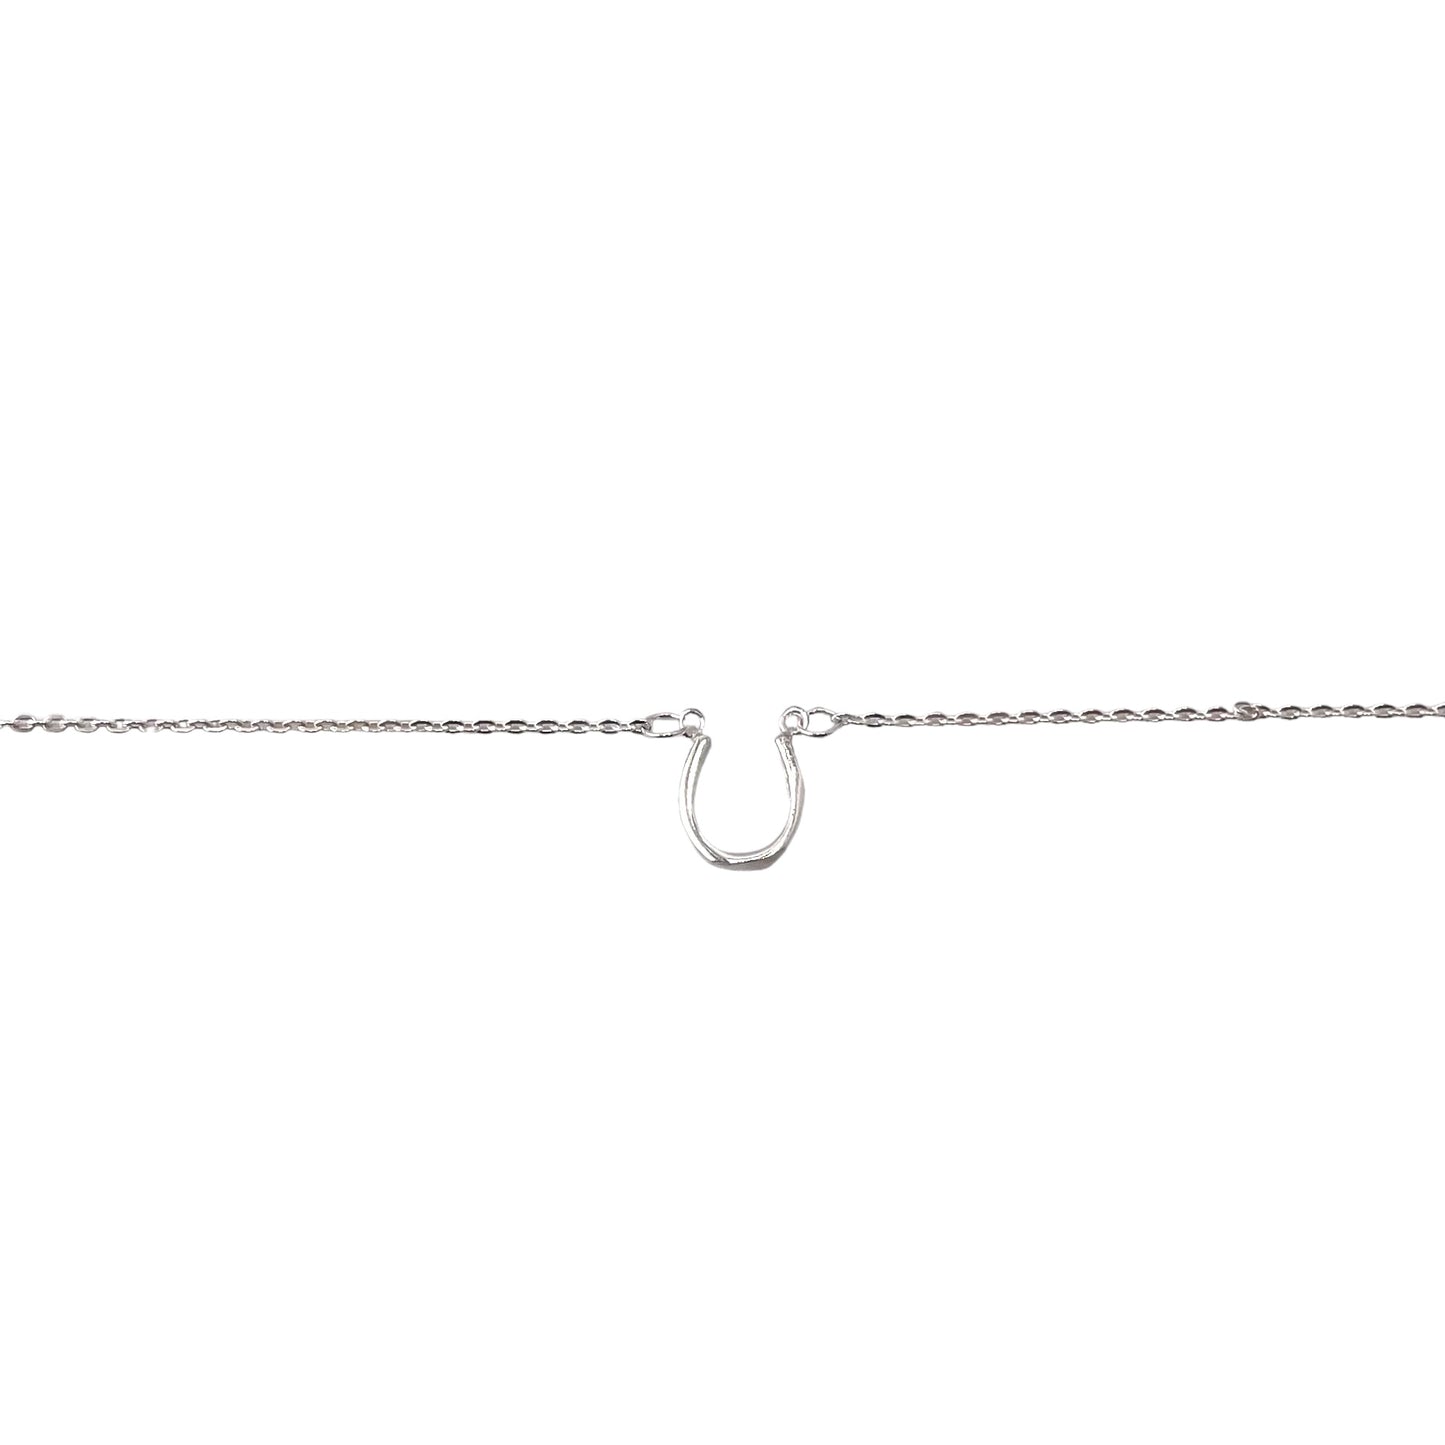 Horseshoe U Chain Necklace 17" Sterling Silver